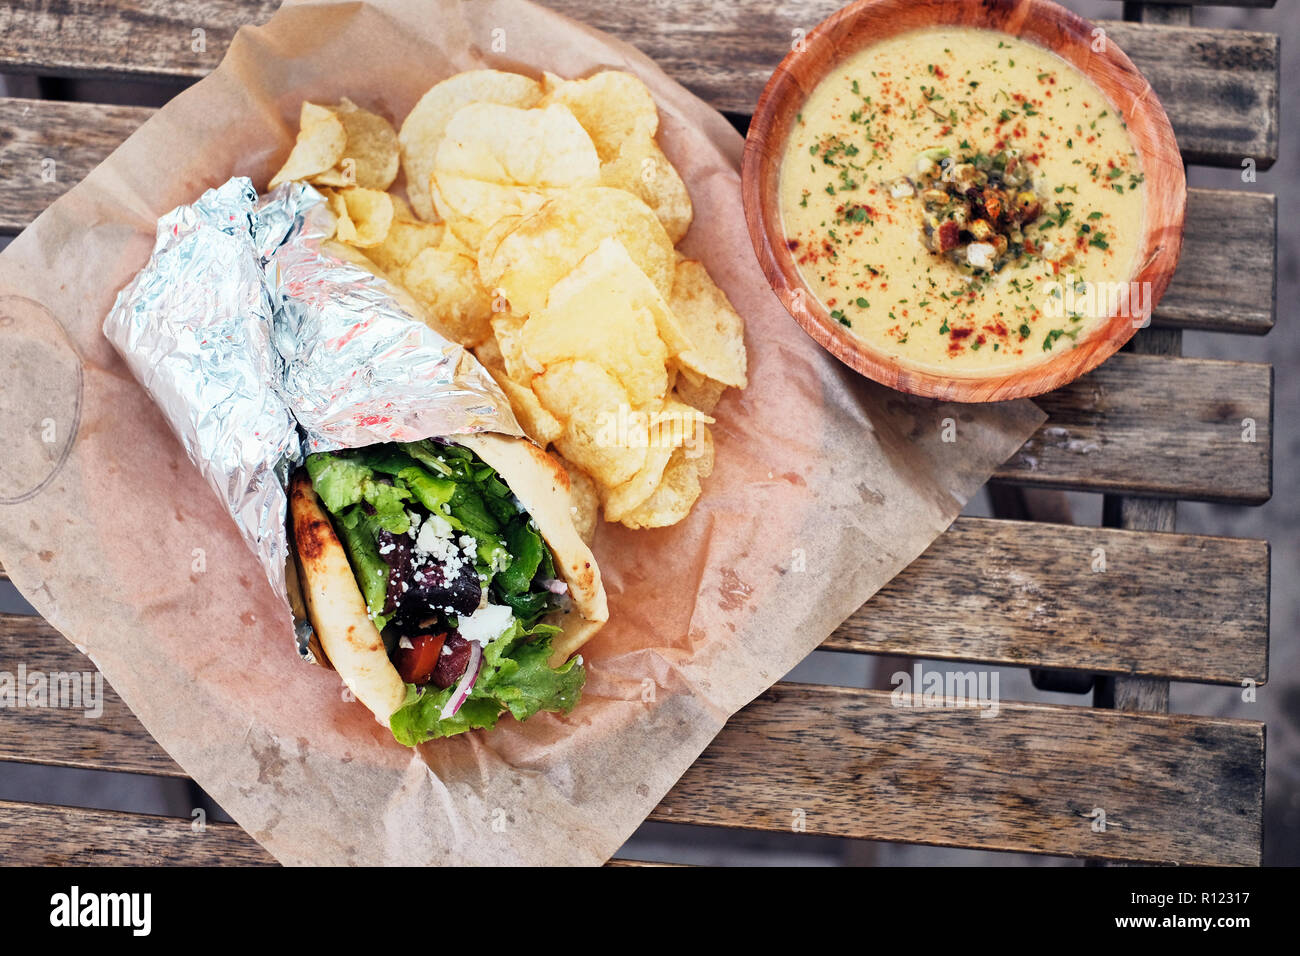 Meal of salad wrap, potato chips and dip Stock Photo